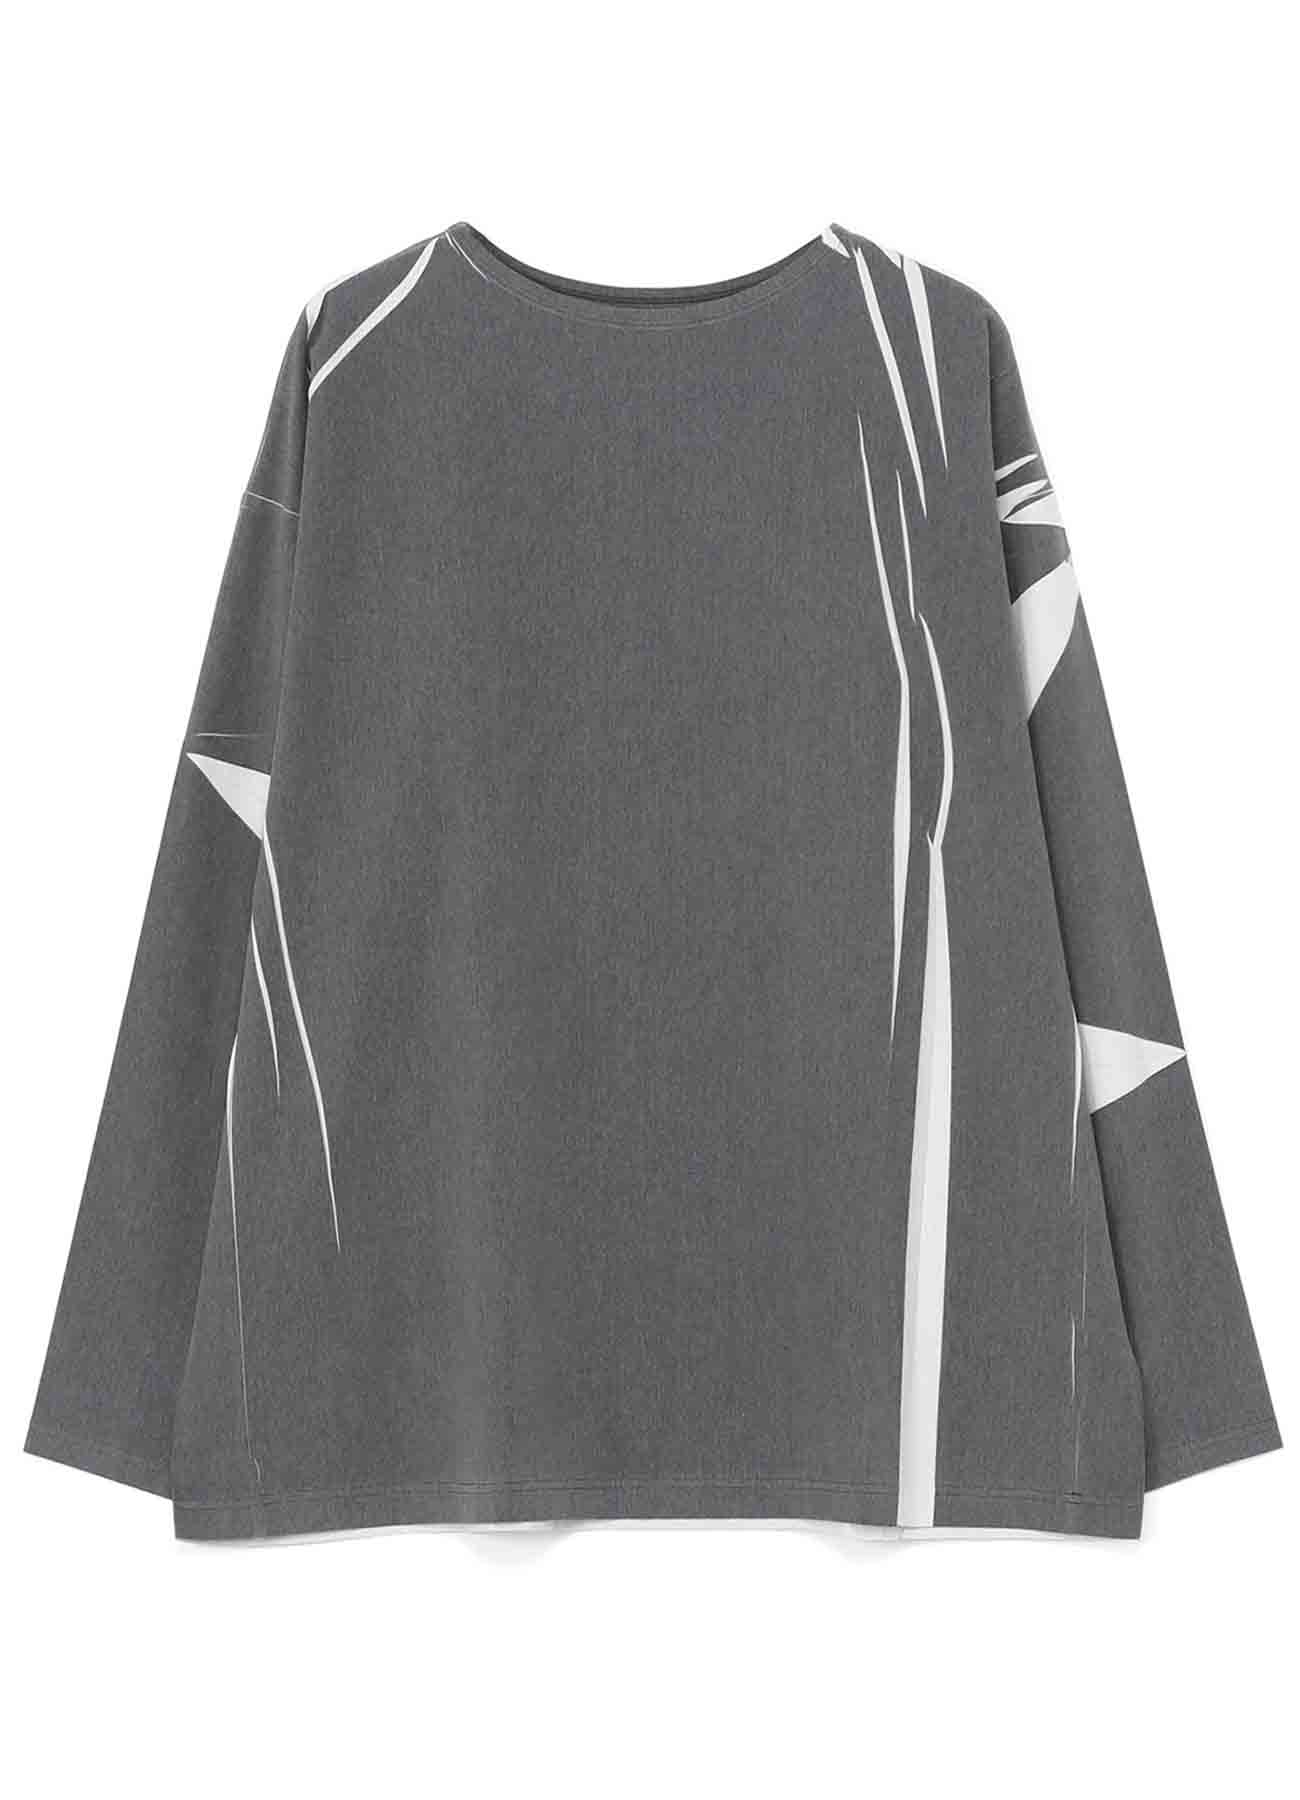 TRICOT TRANSFERRED PRINT ROUND NECK BIG LONG T